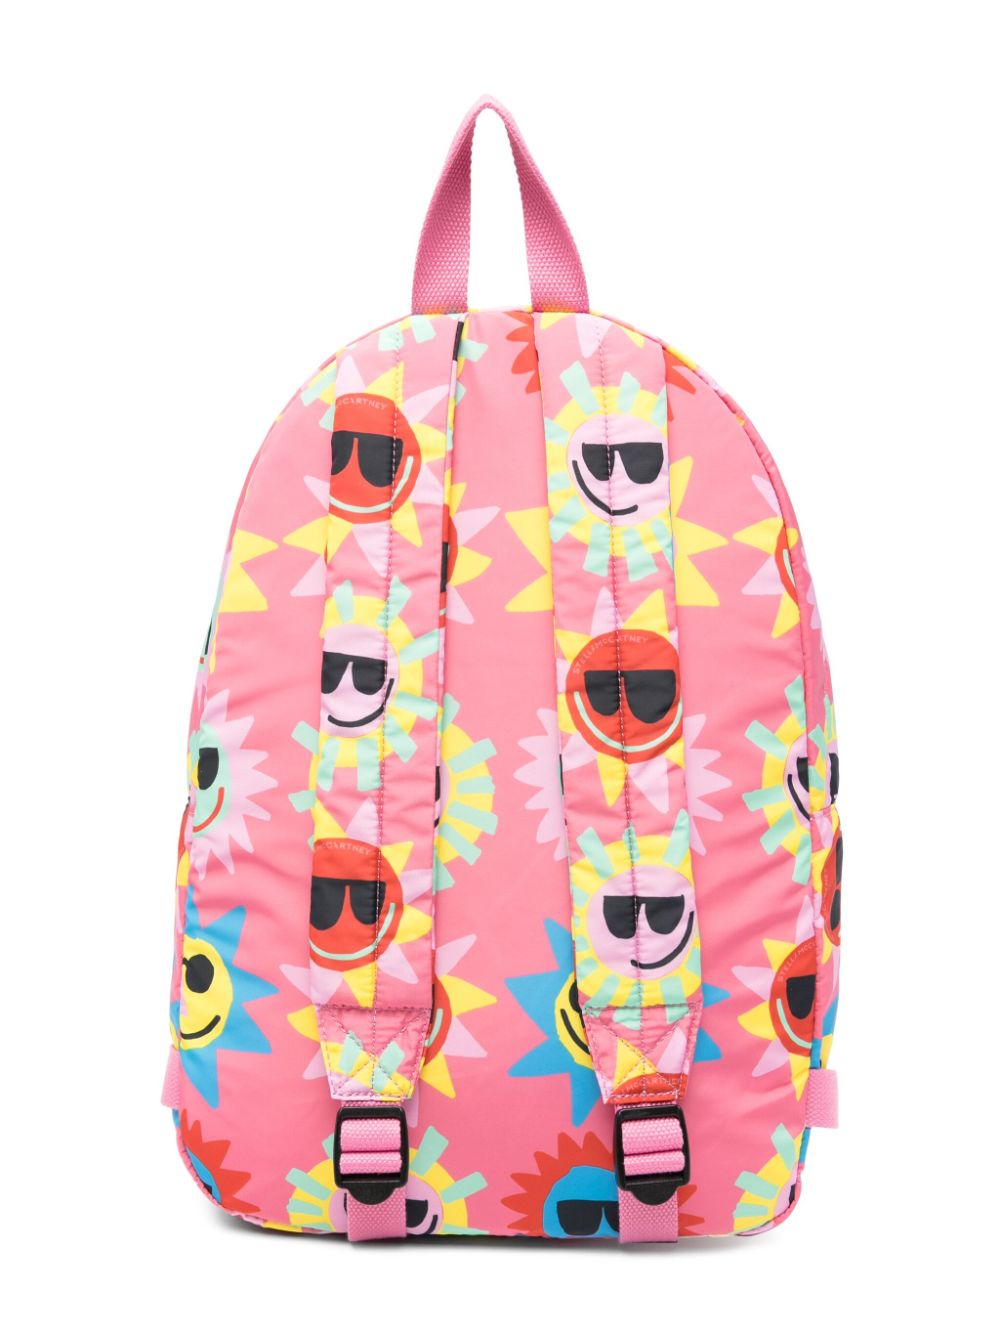 Bubblegum backpack for girls with print